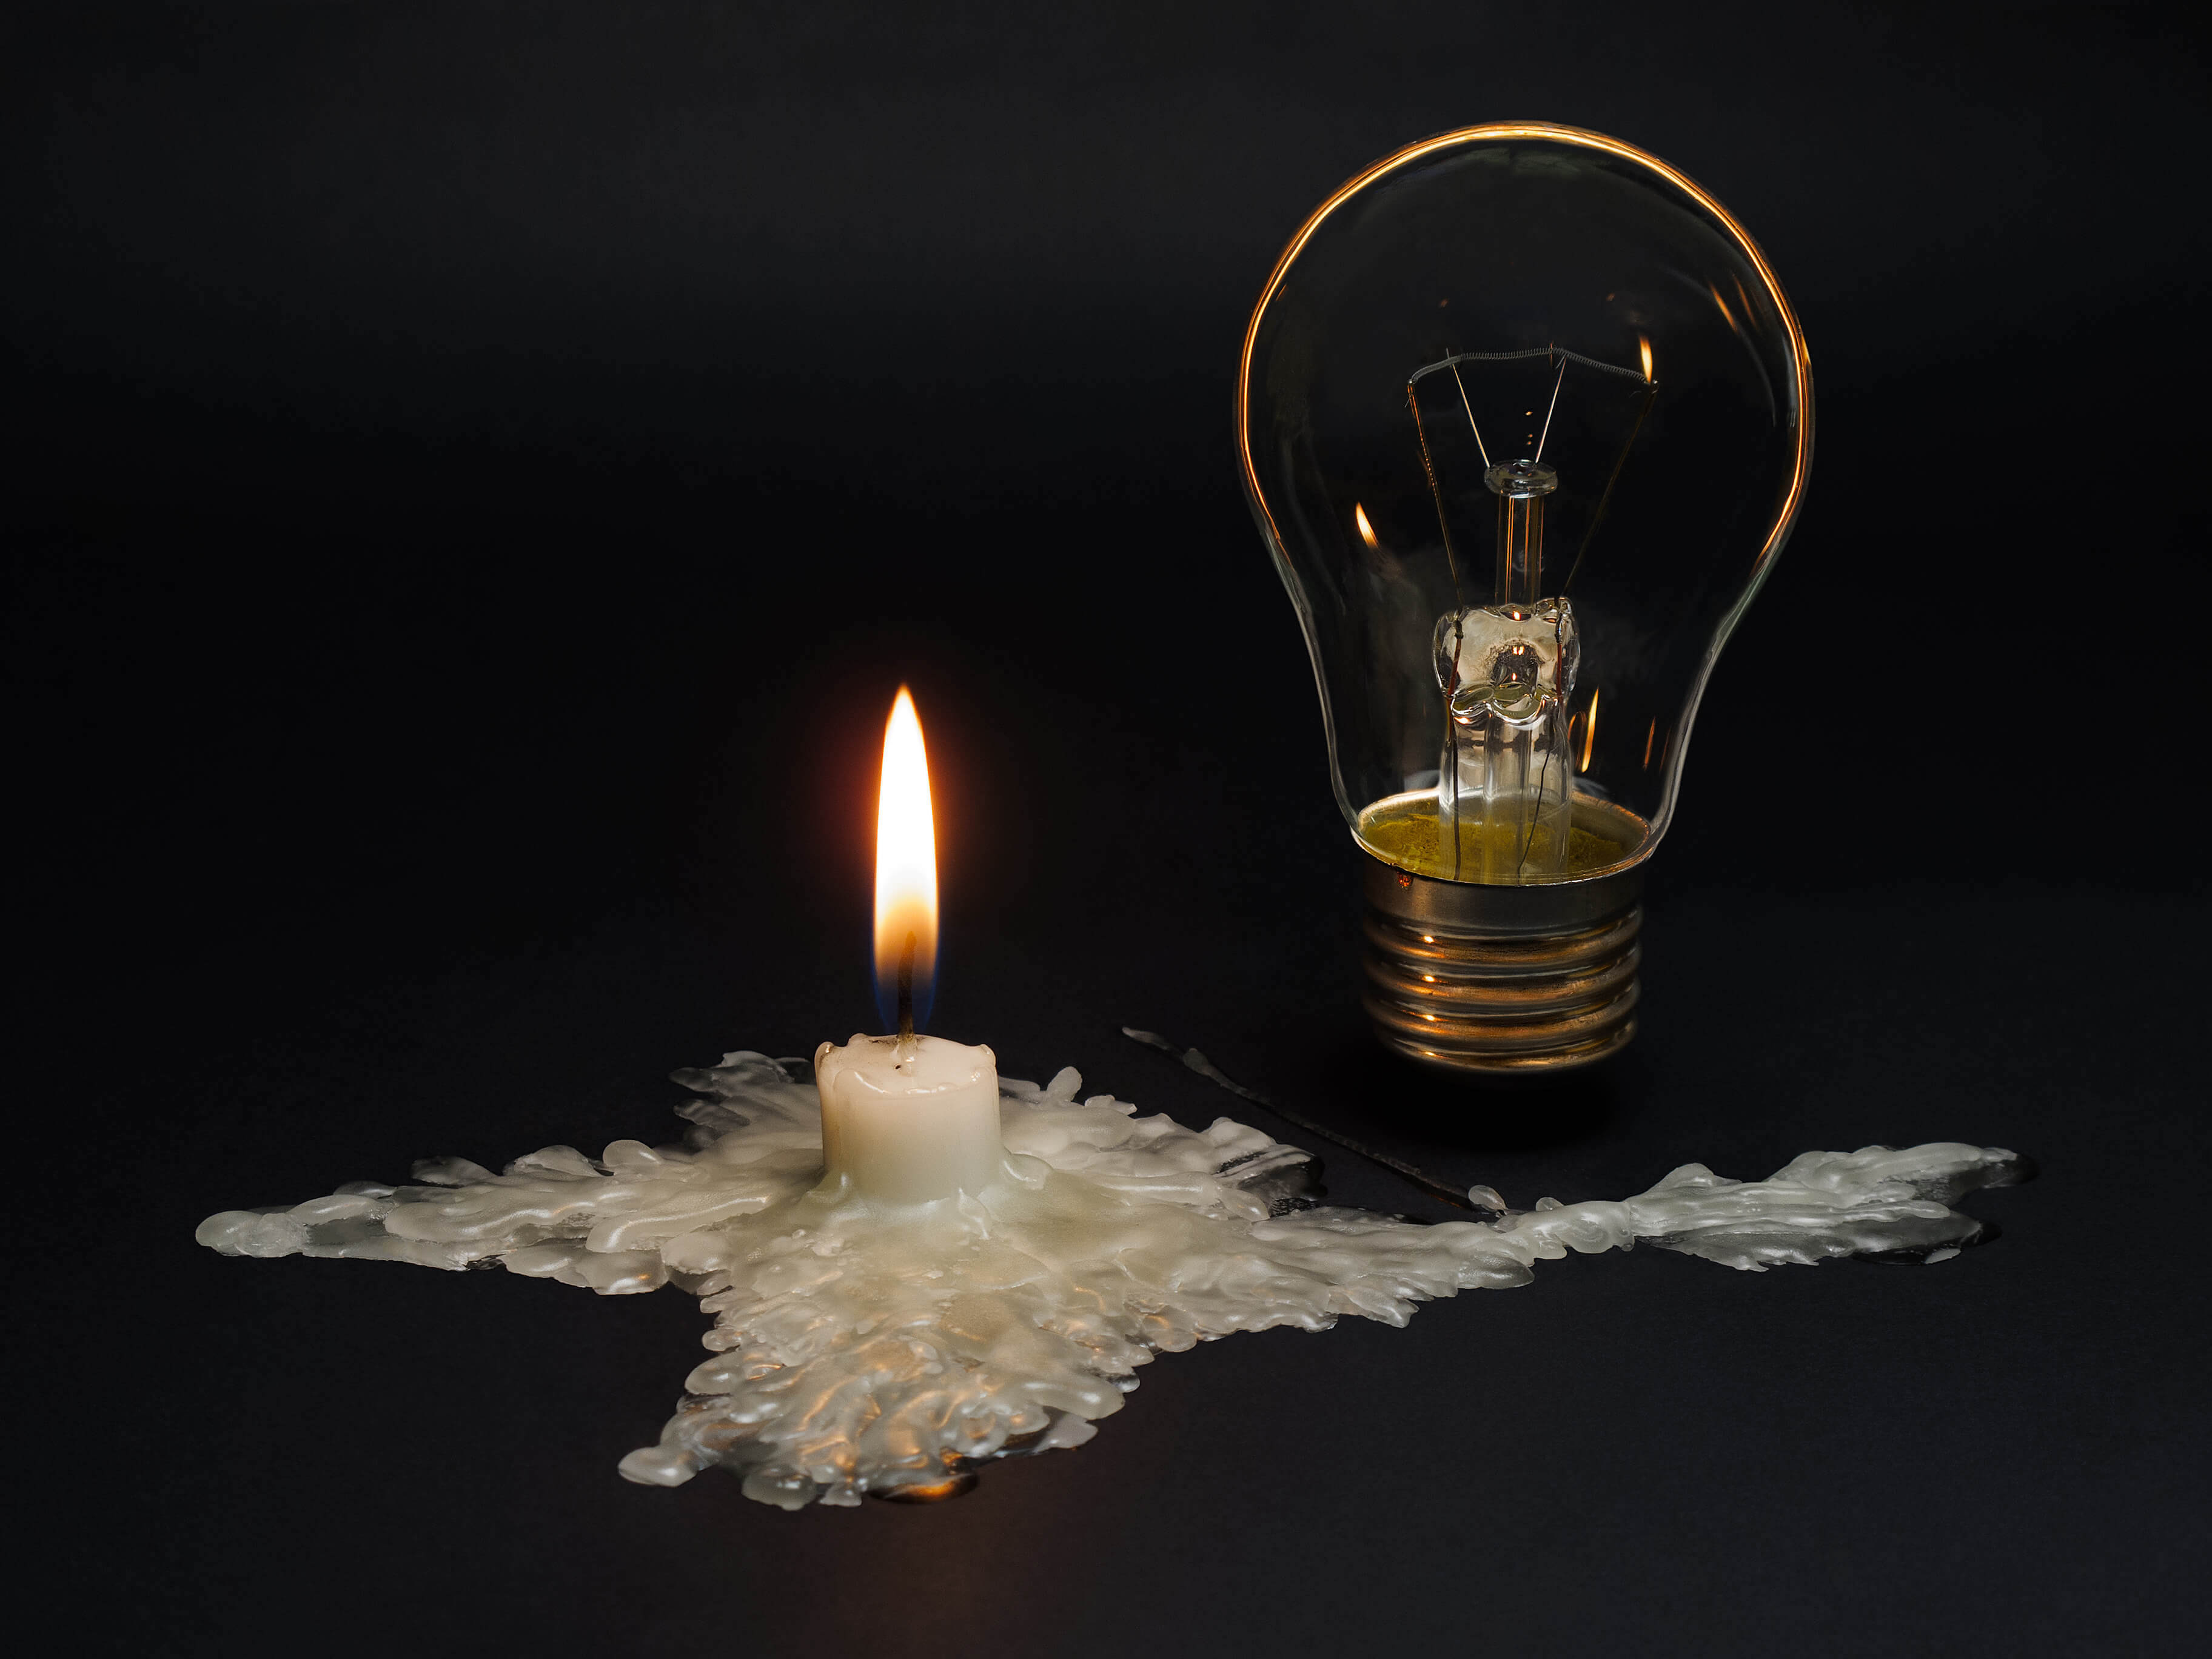 am I entitled to power cut compensation from my supplier?